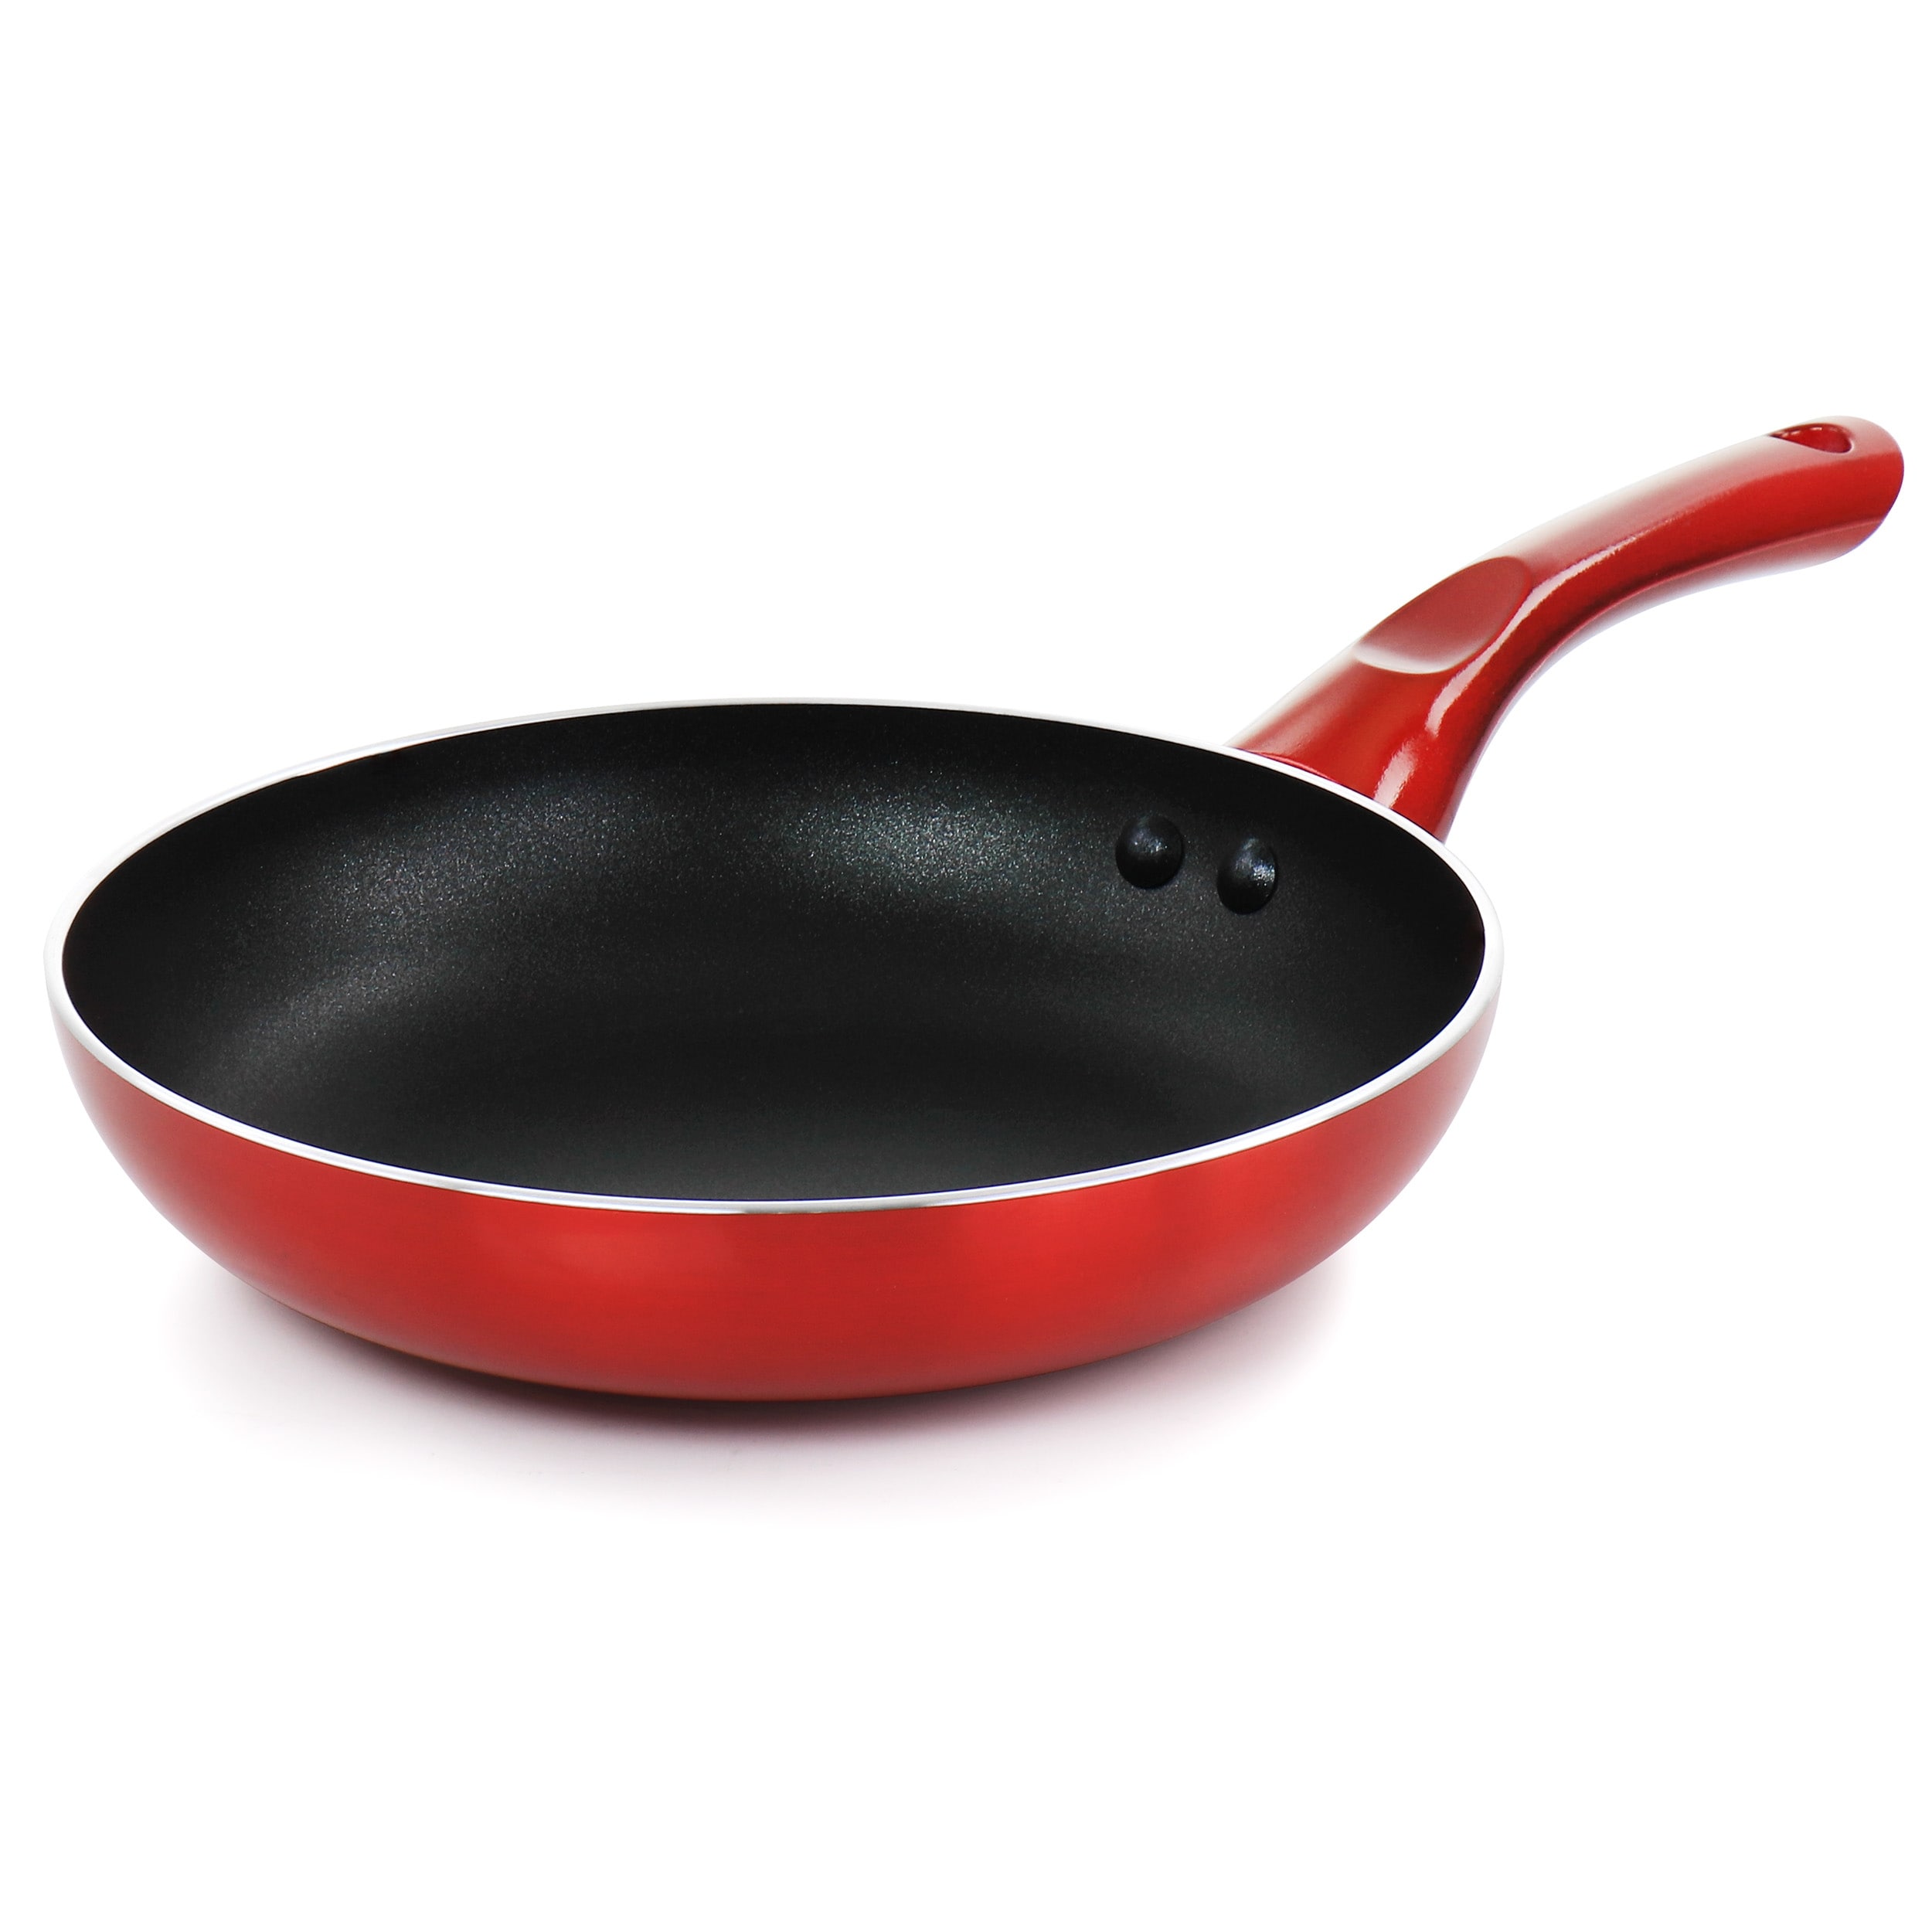 https://ak1.ostkcdn.com/images/products/is/images/direct/693e10ce9ca4e4b64cfbc1f05ba278572d66a259/8-Inch-Non-Stick-Gourmet-Fry-Pan-in-Scarlet.jpg